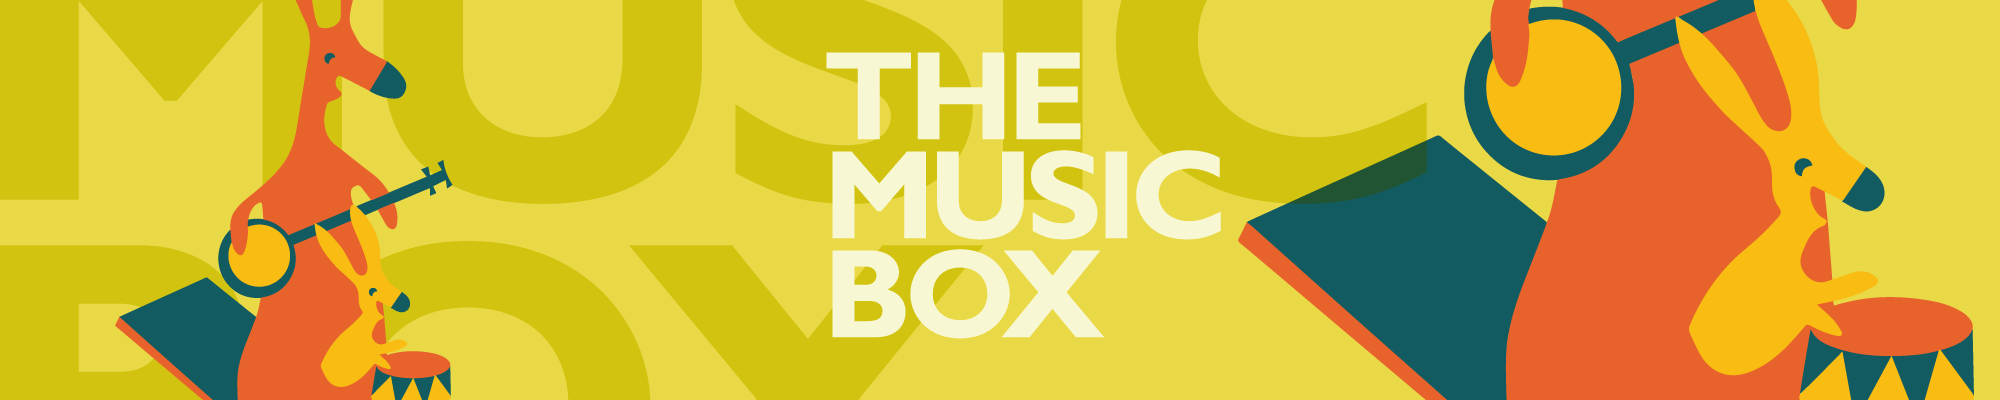 The Music Box Online Learning